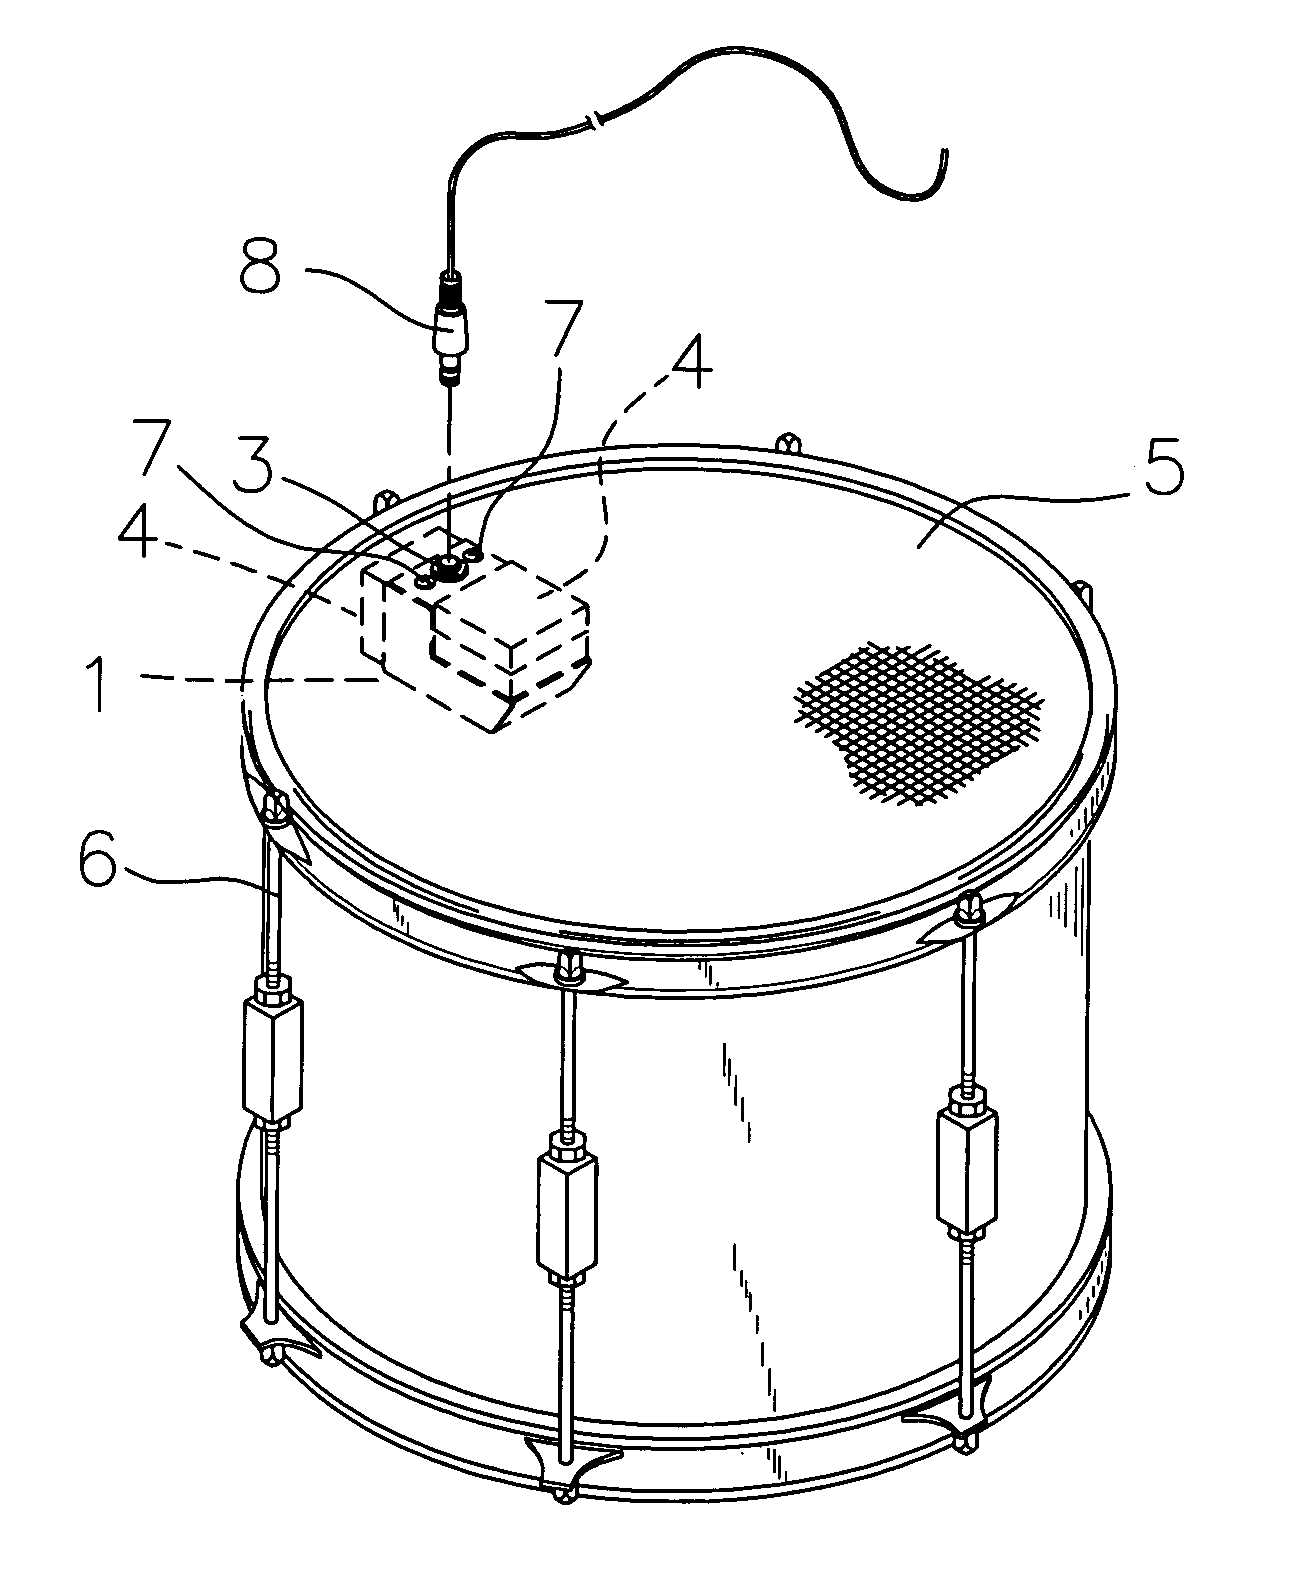 Pickup and base structure of a drum head